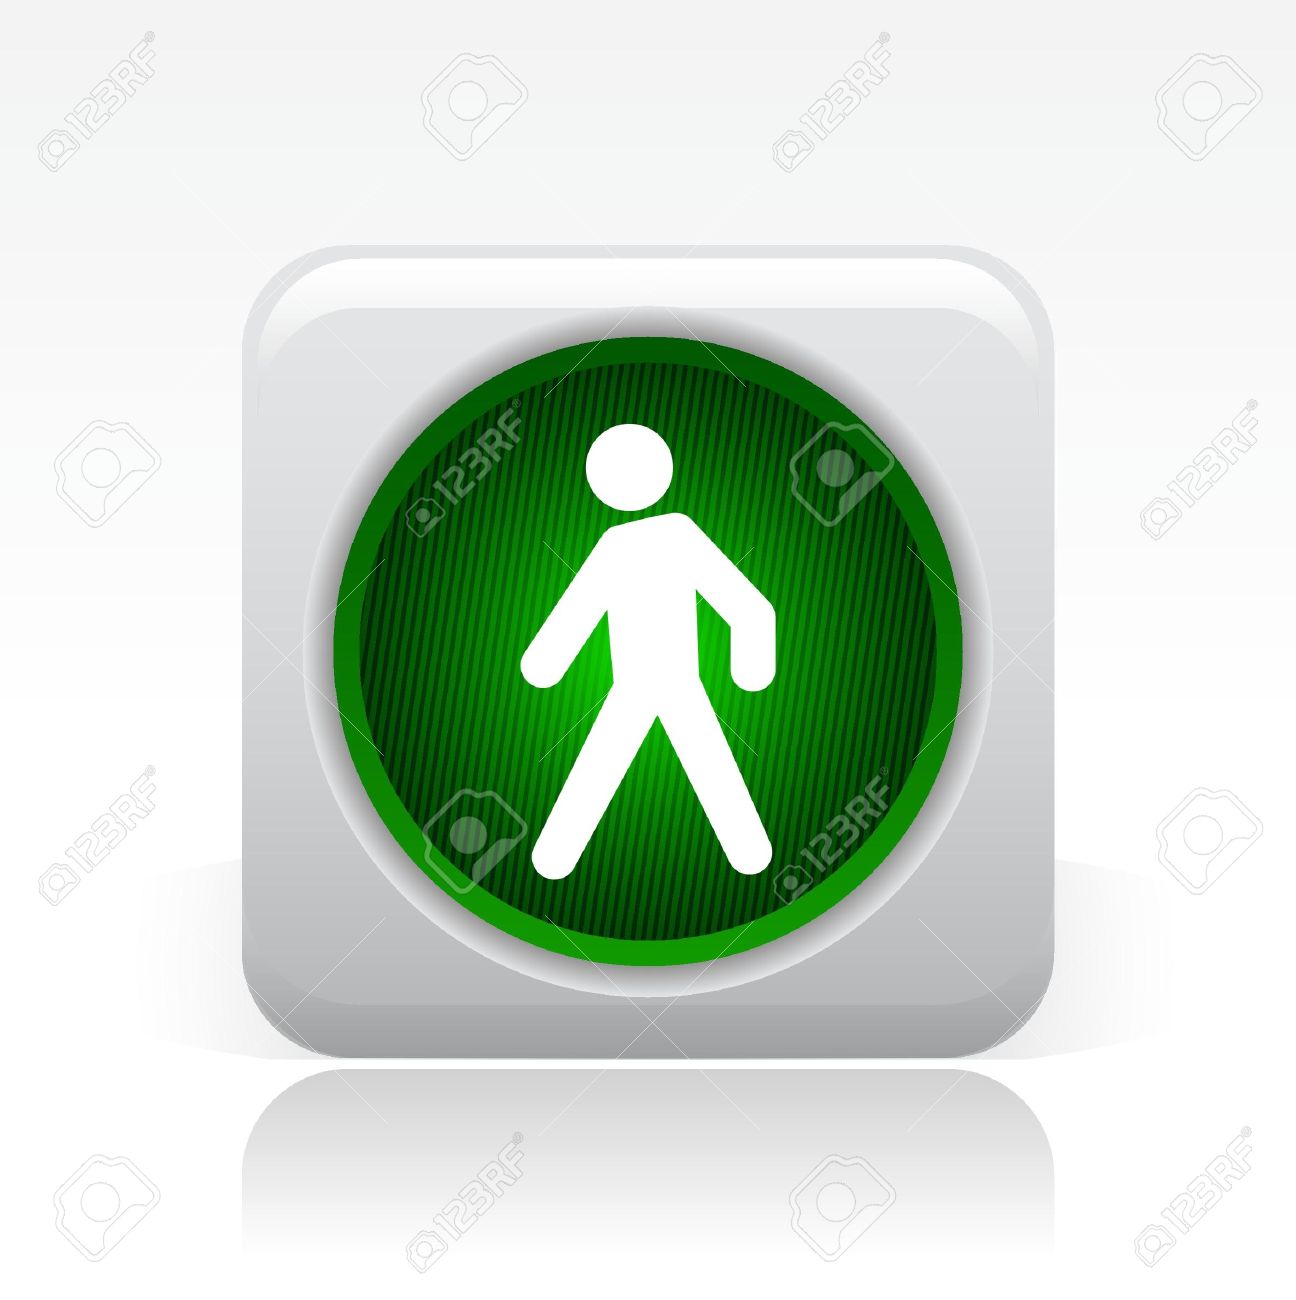 Vector illustration of a green traffic light (isoladted) vector 